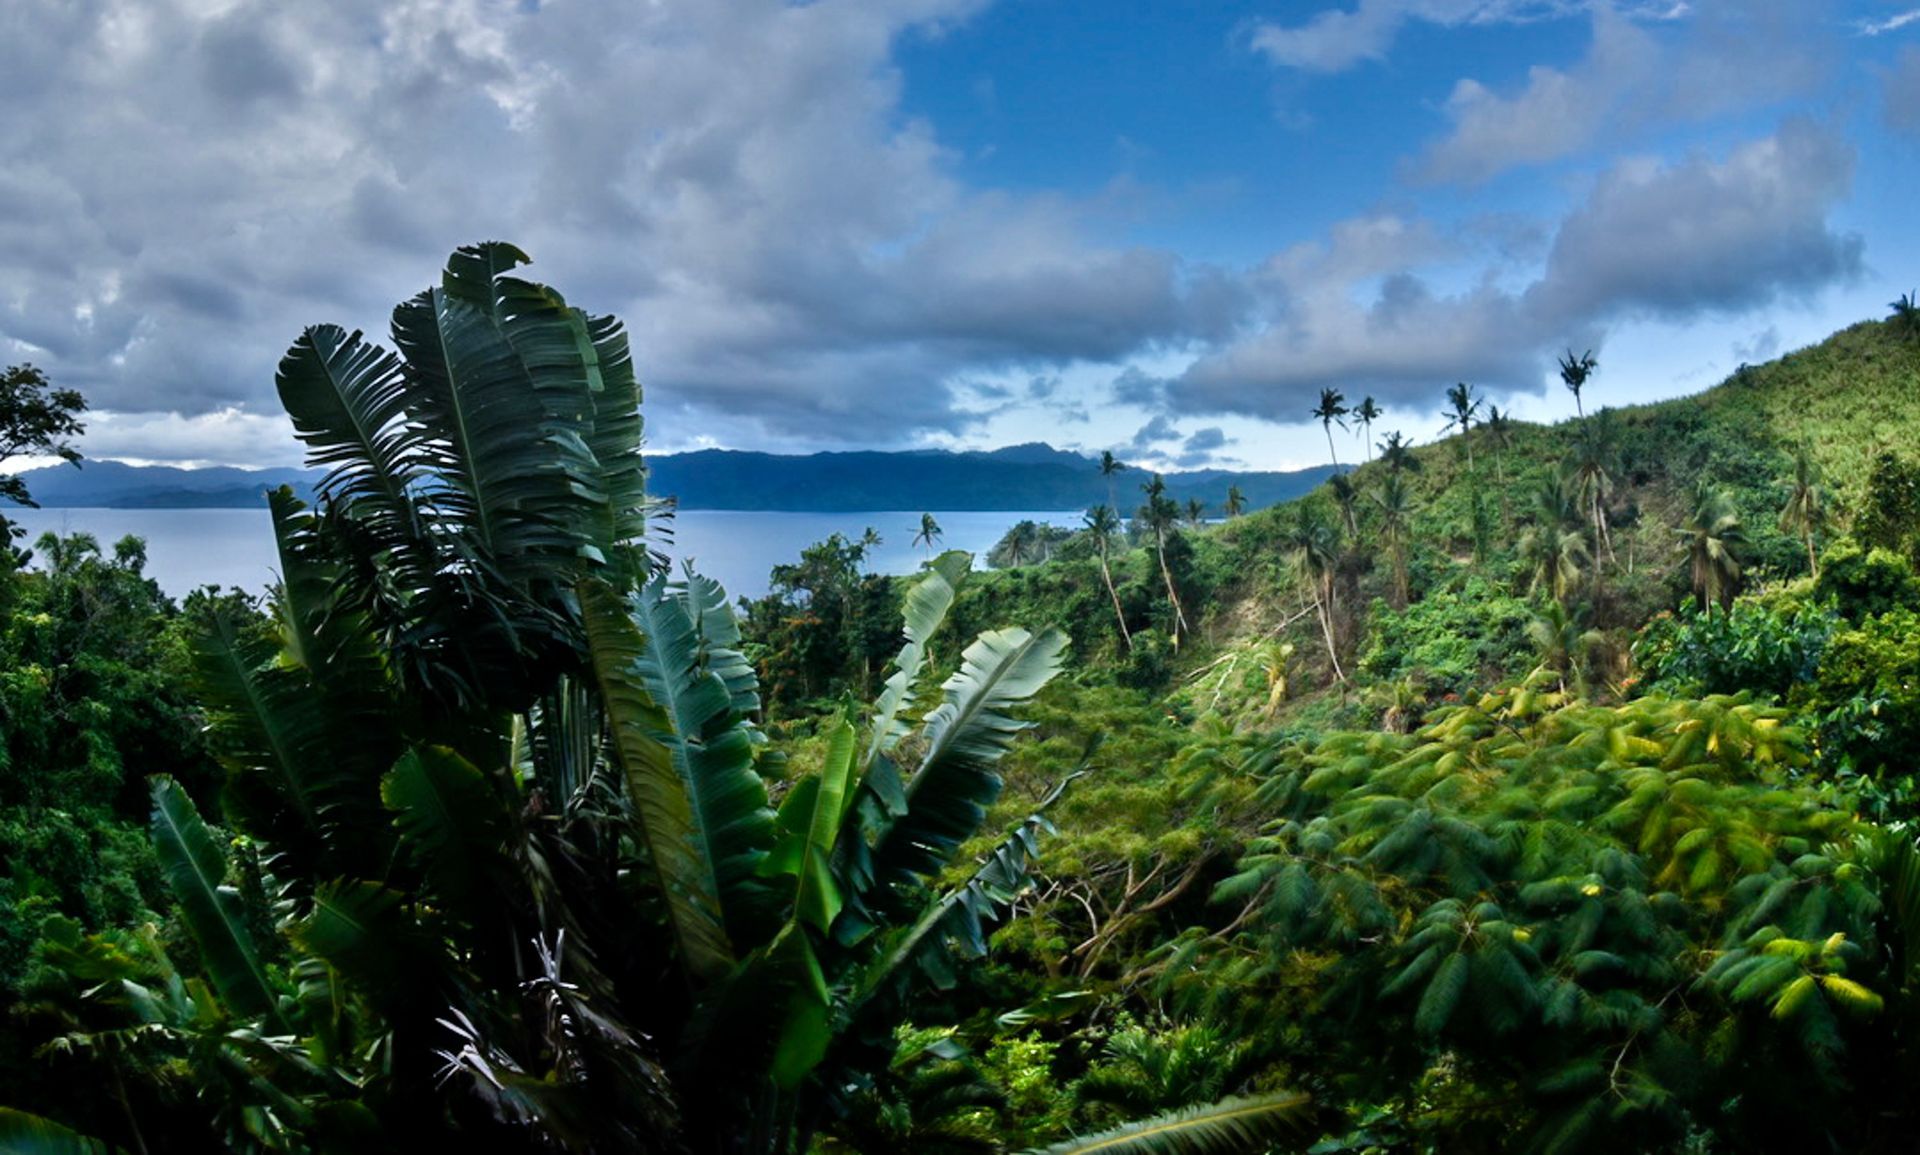 The view from the verandah over the lush jungle and blue ocean of Savusavu